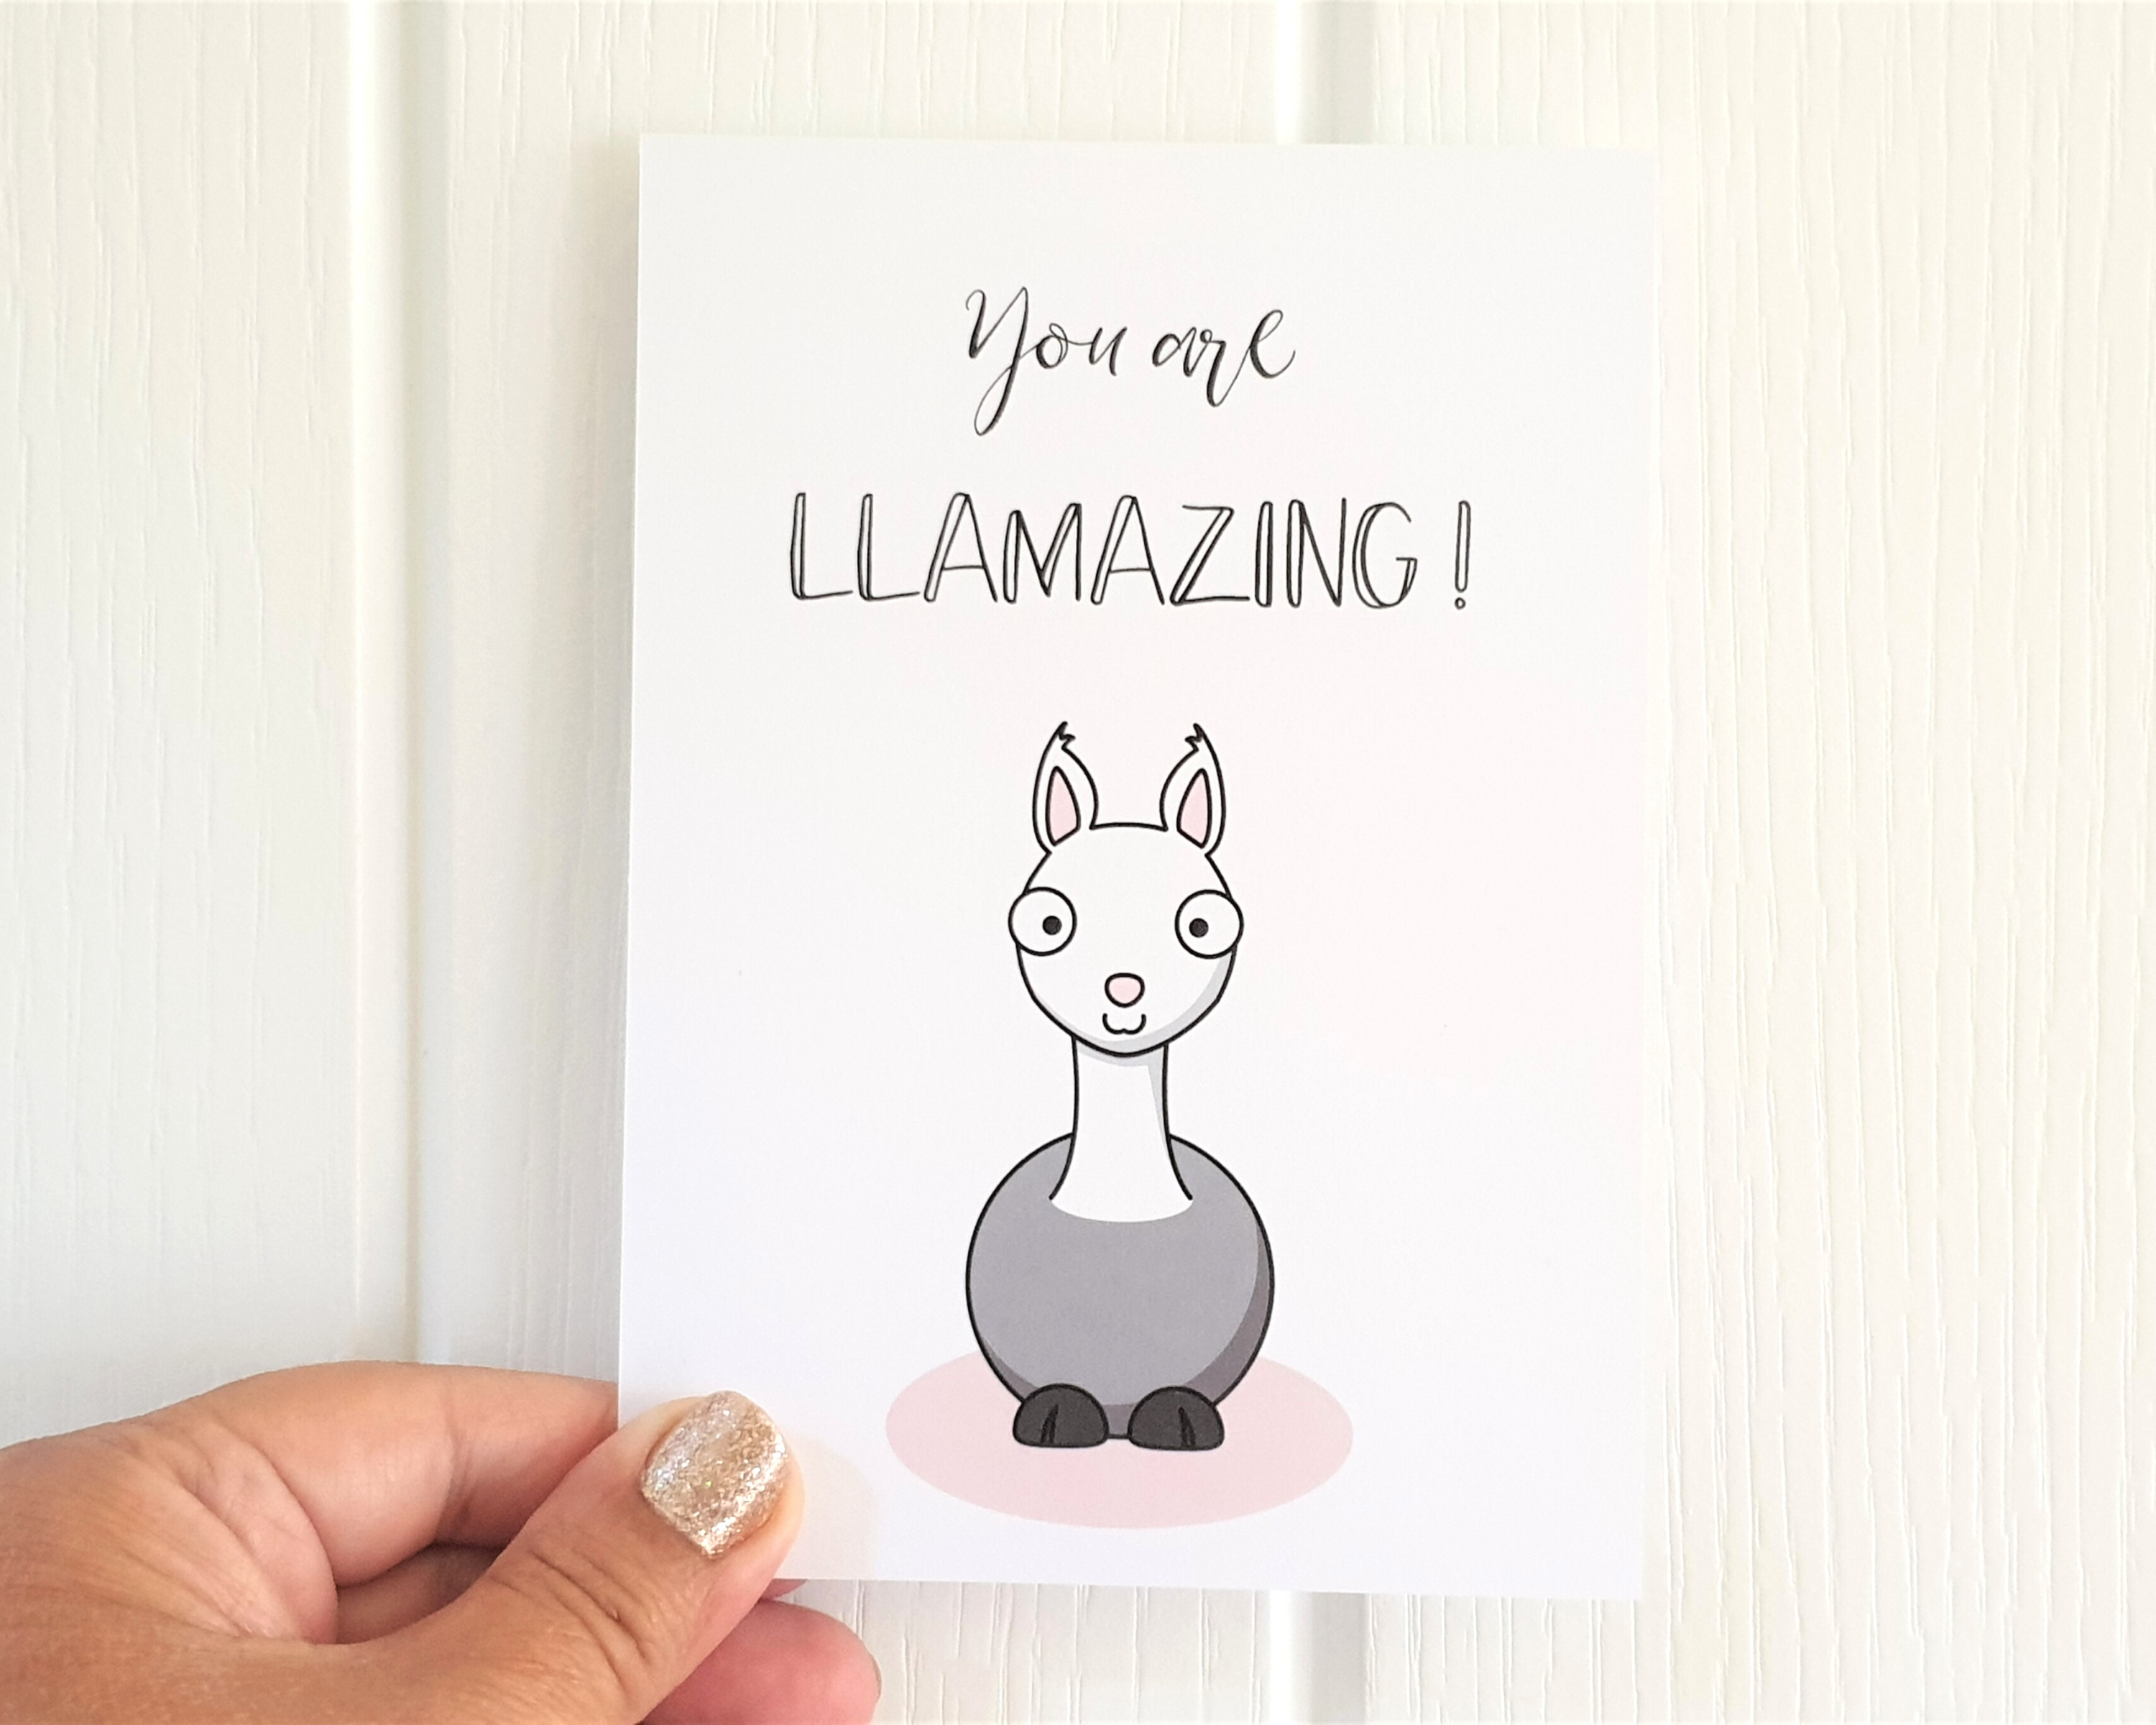 Poppleberry A6 folded greetings card, with a smiling grey llama illustration, on white cardstock, size compared with hand.